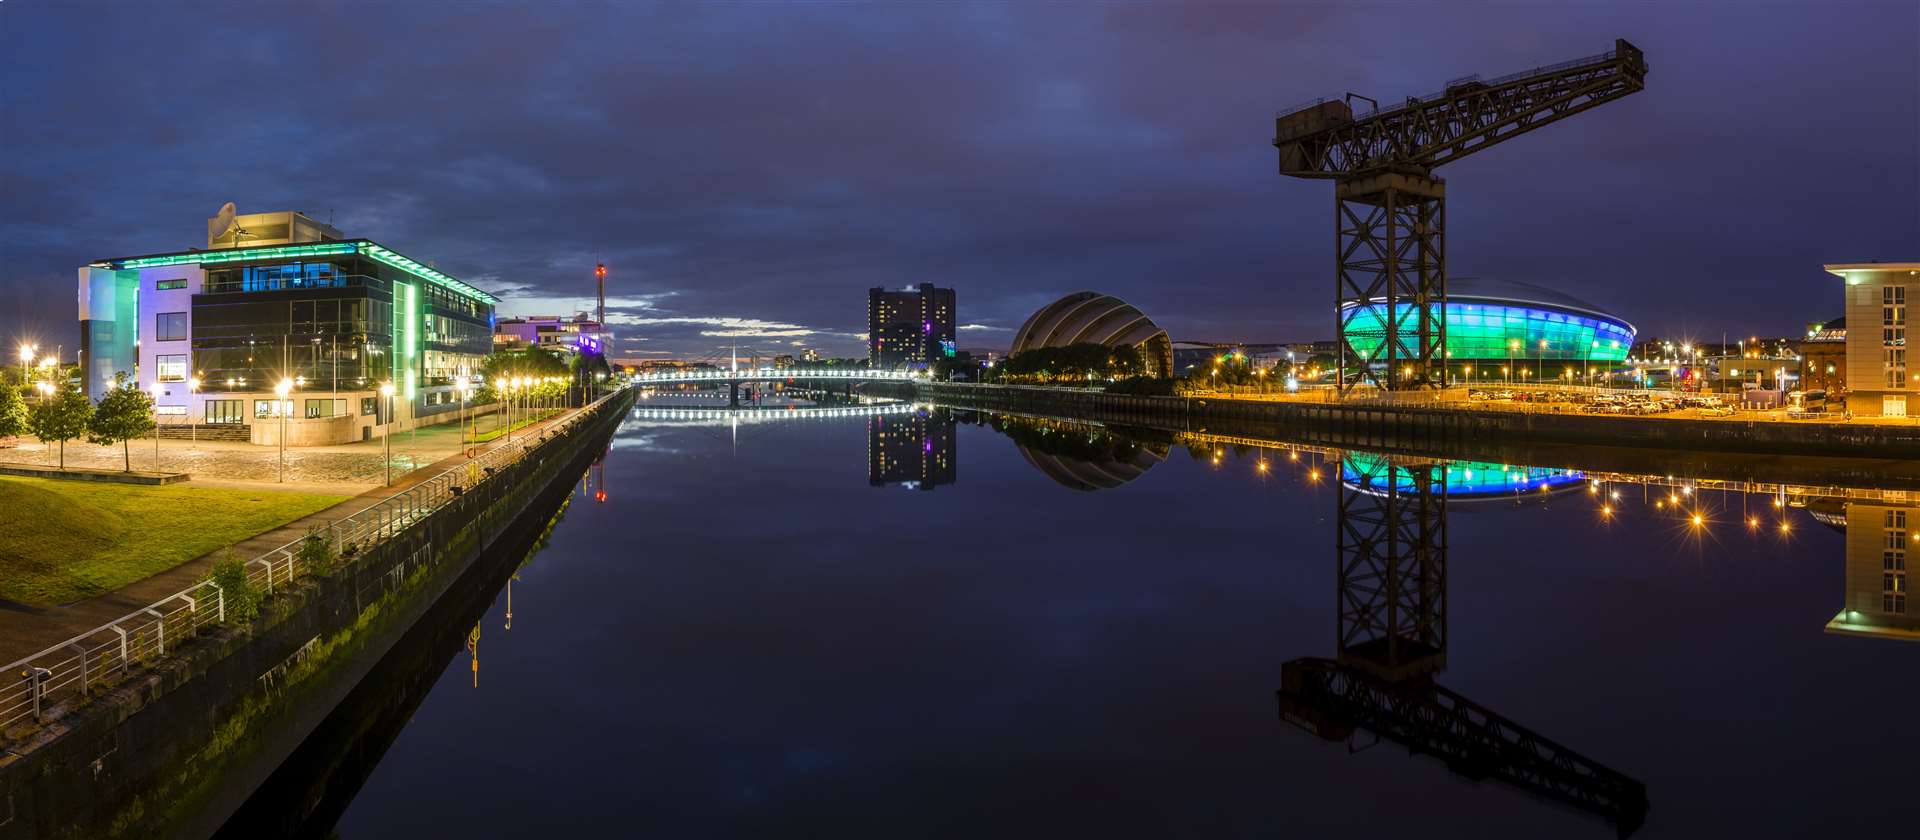 Glasgow is set to host COP26 in November 2021.